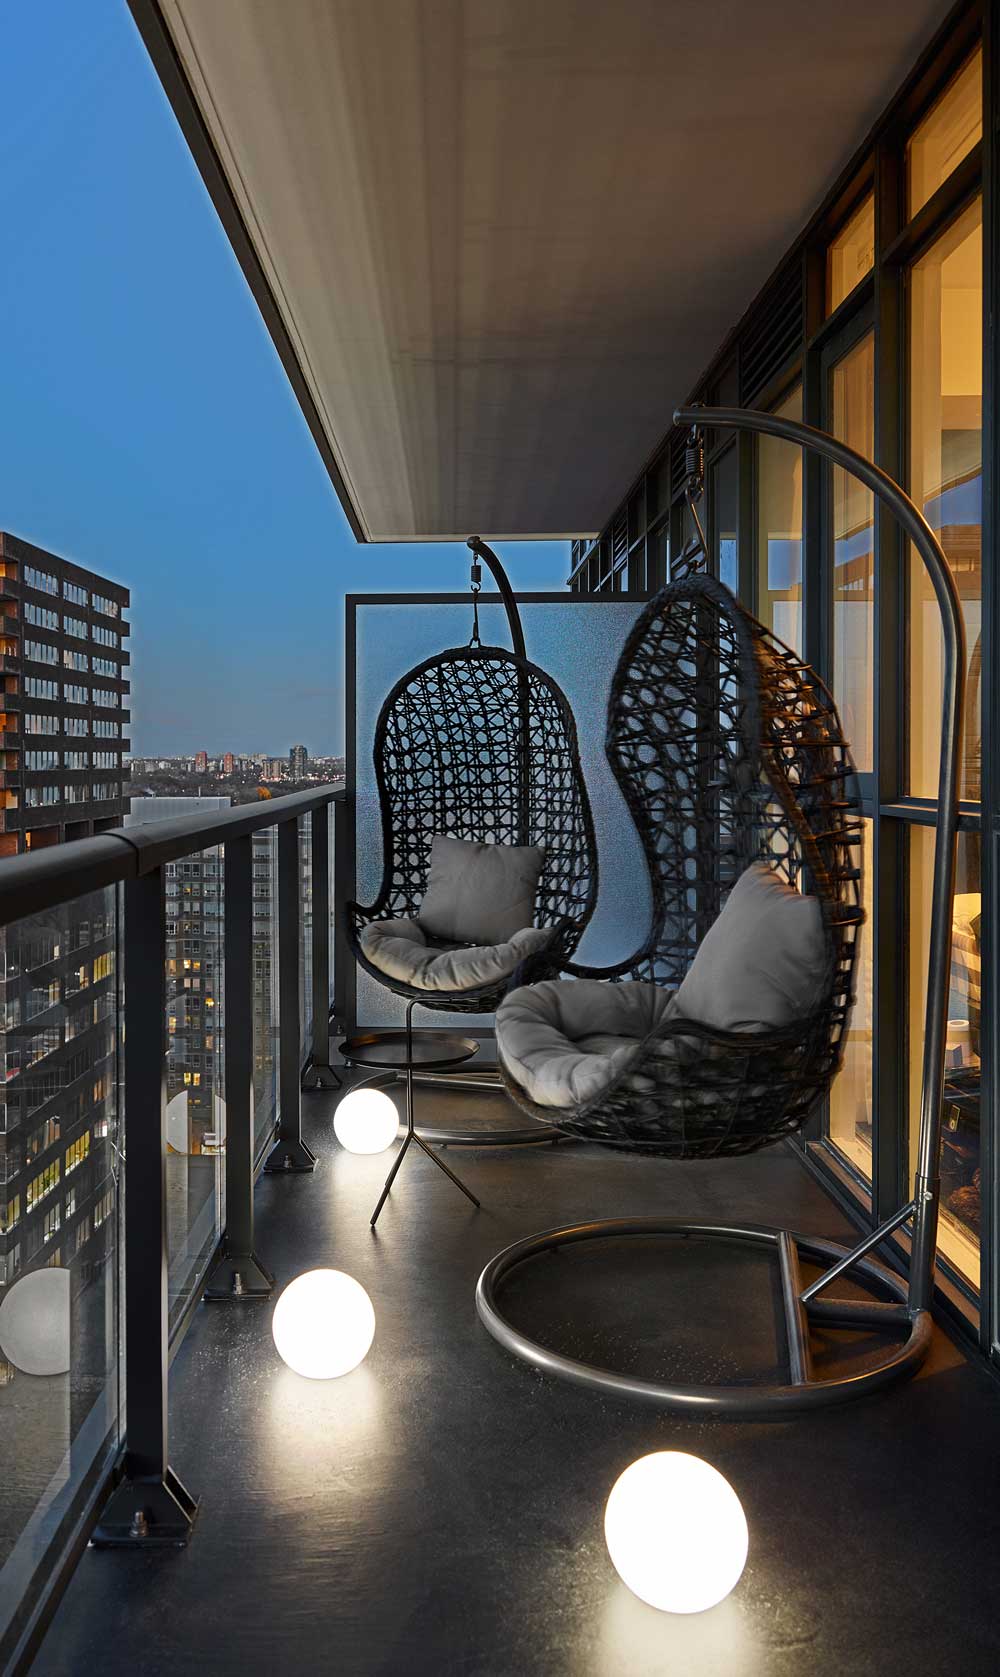 Balcony with hanging basket chairs and mood lighting on the floor